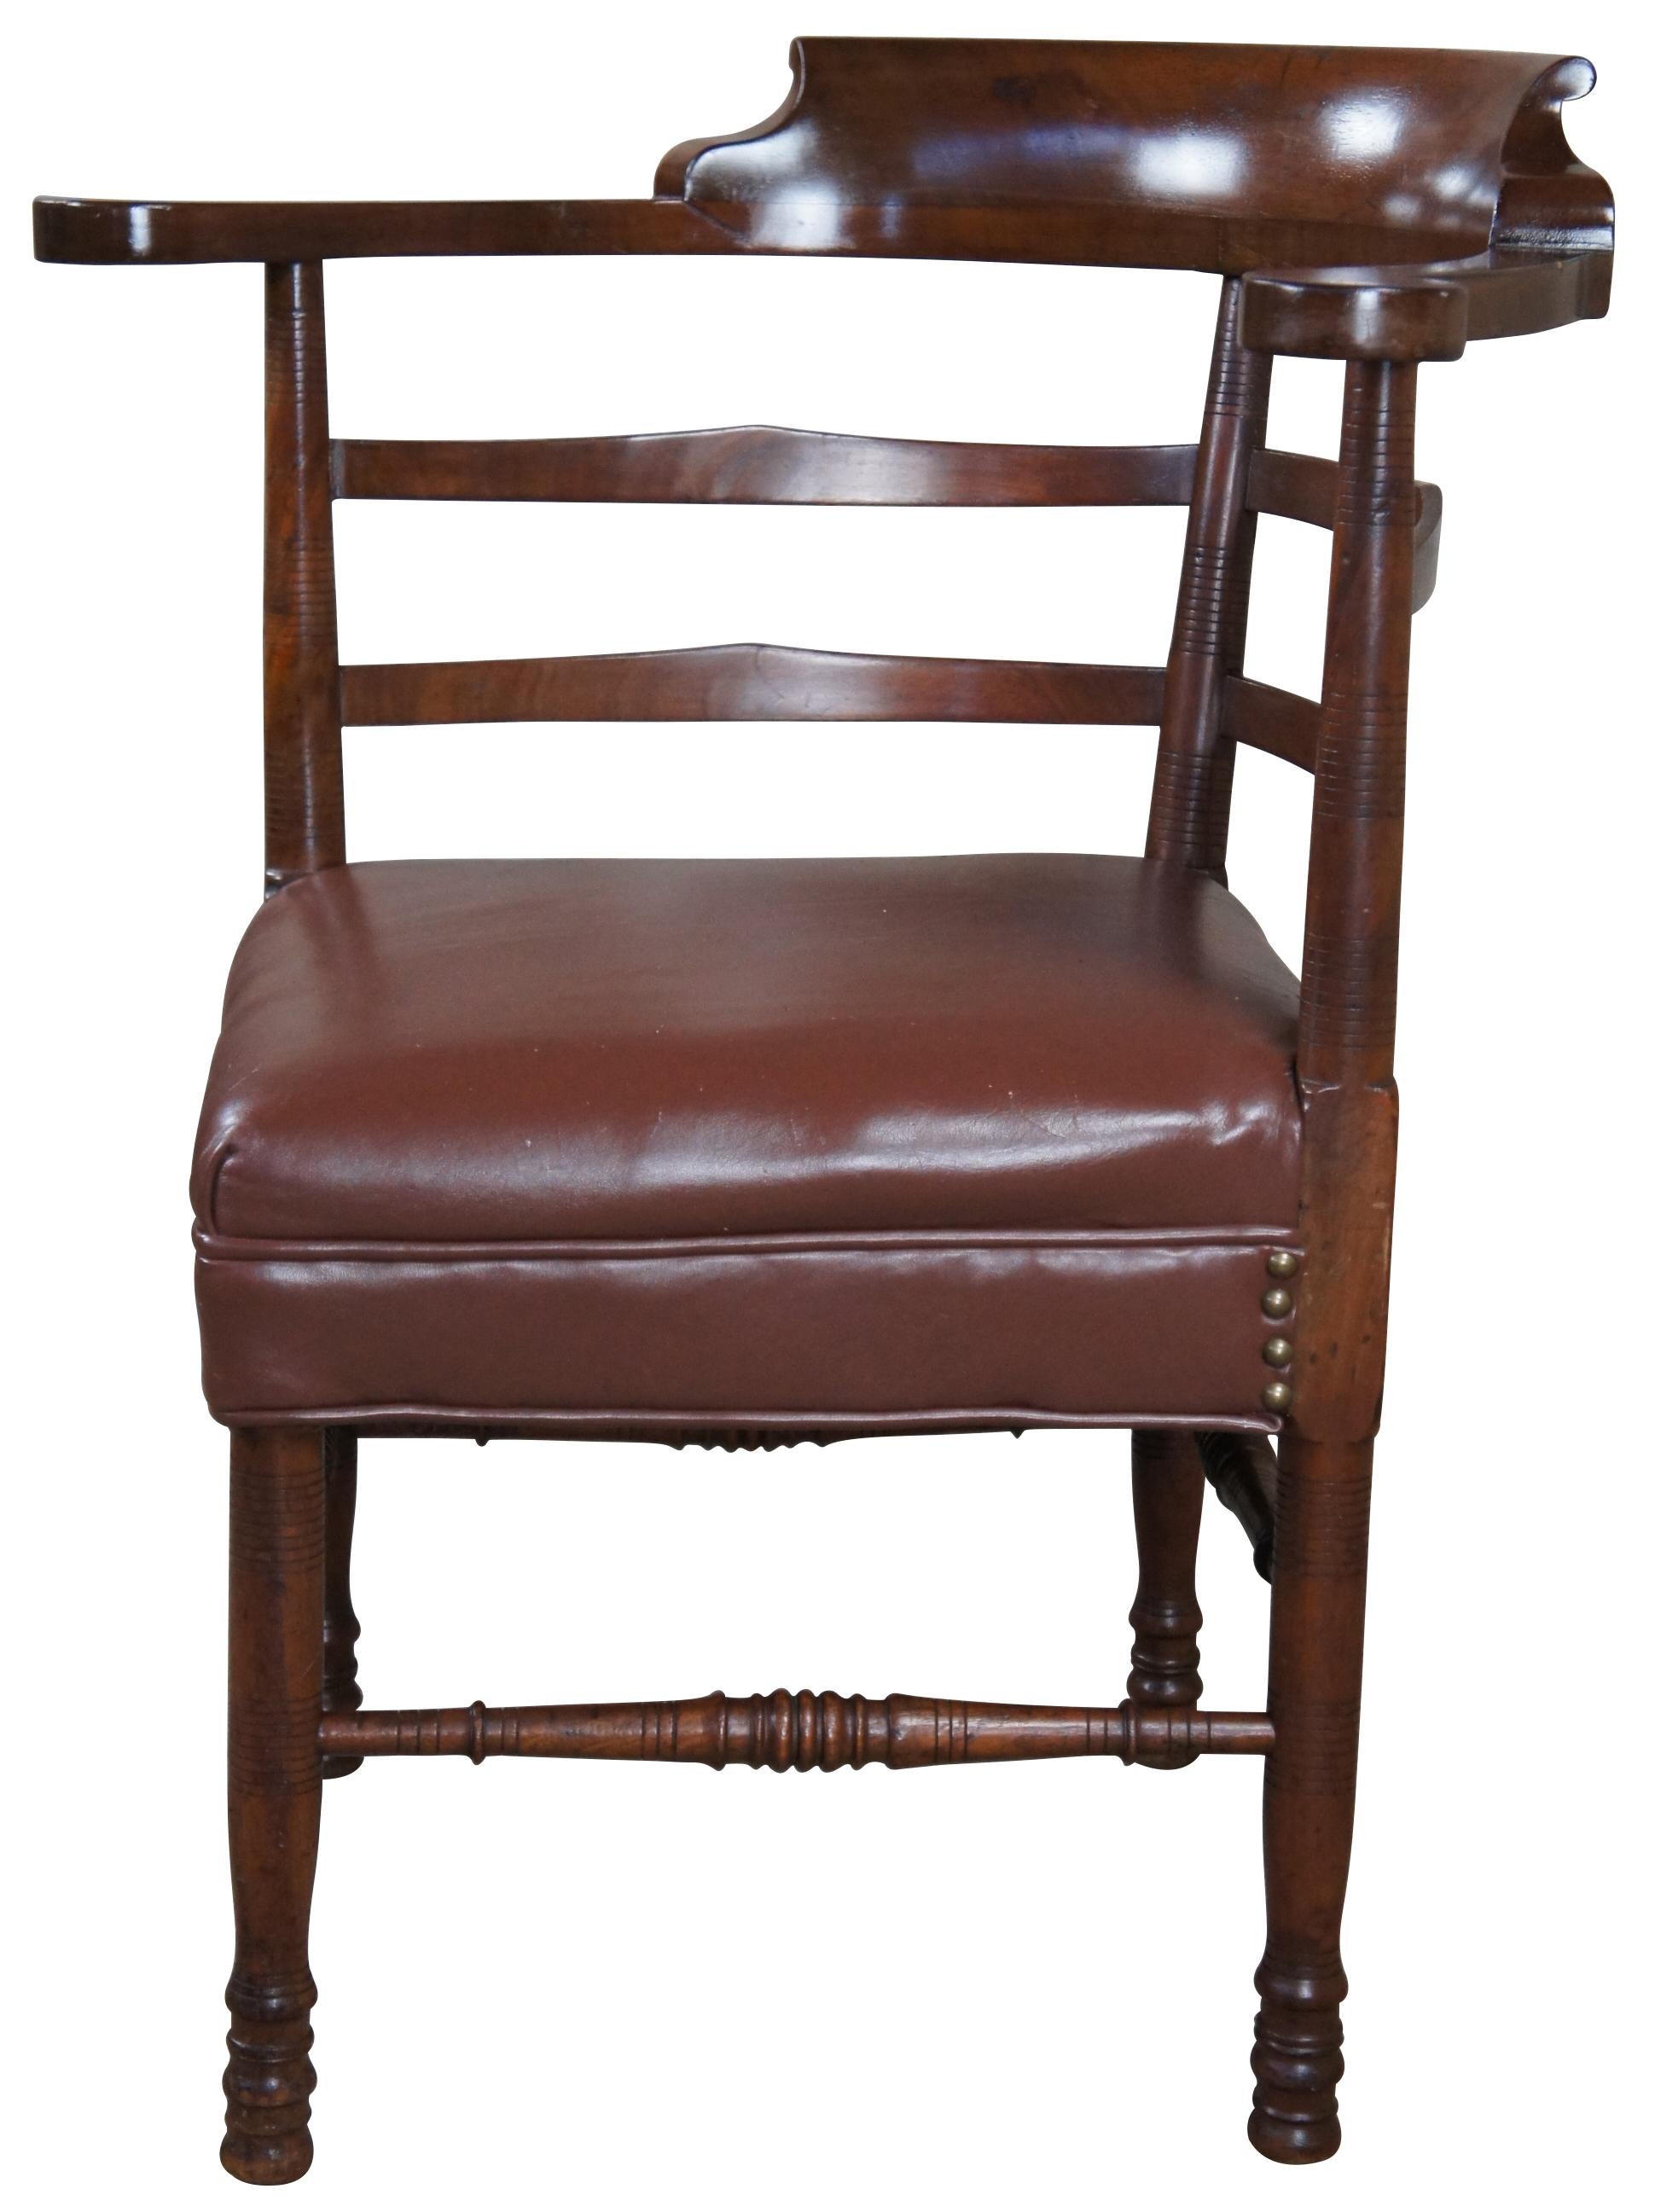 Antique English Country roundabout corner armchair. Made of mahogany featuring rounded form with ladderback supports over turned posts and supports, vinyl seat and nailhead accents.
  